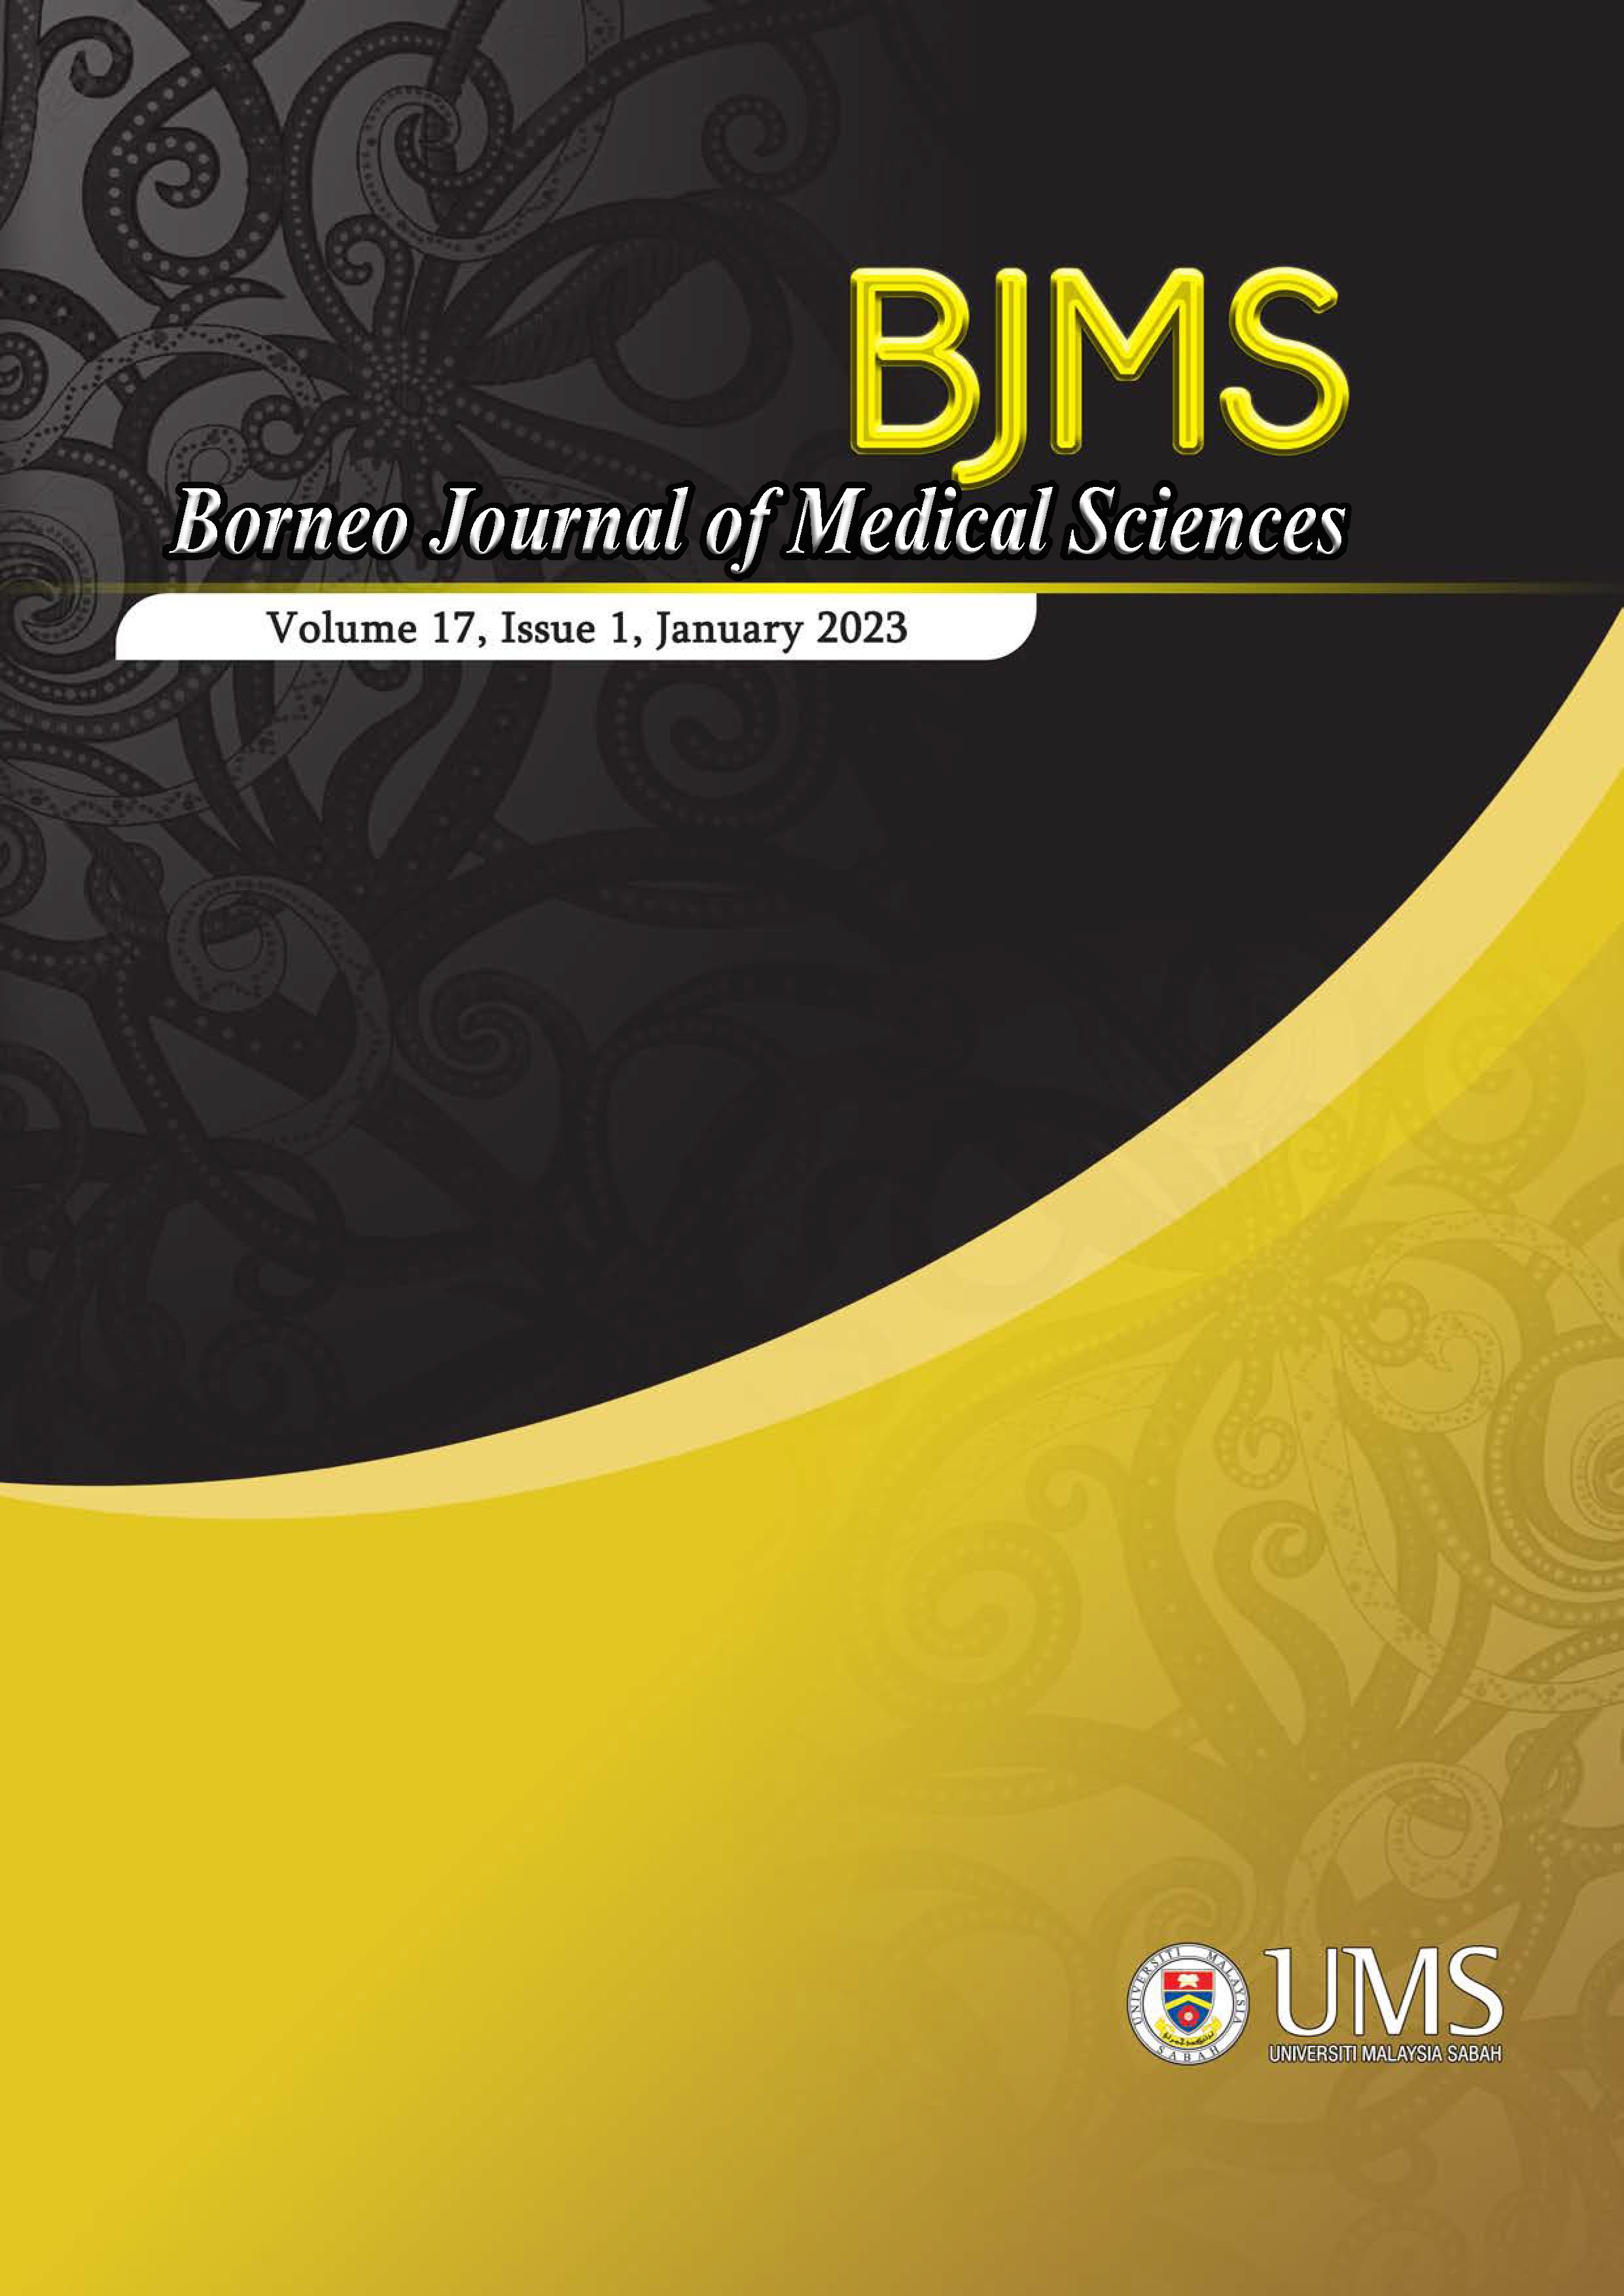 					View Vol. 17 No. 1 (2023): BORNEO JOURNAL OF MEDICAL SCIENCES VOLUME 17, ISSUE 1, JANUARY 2023
				